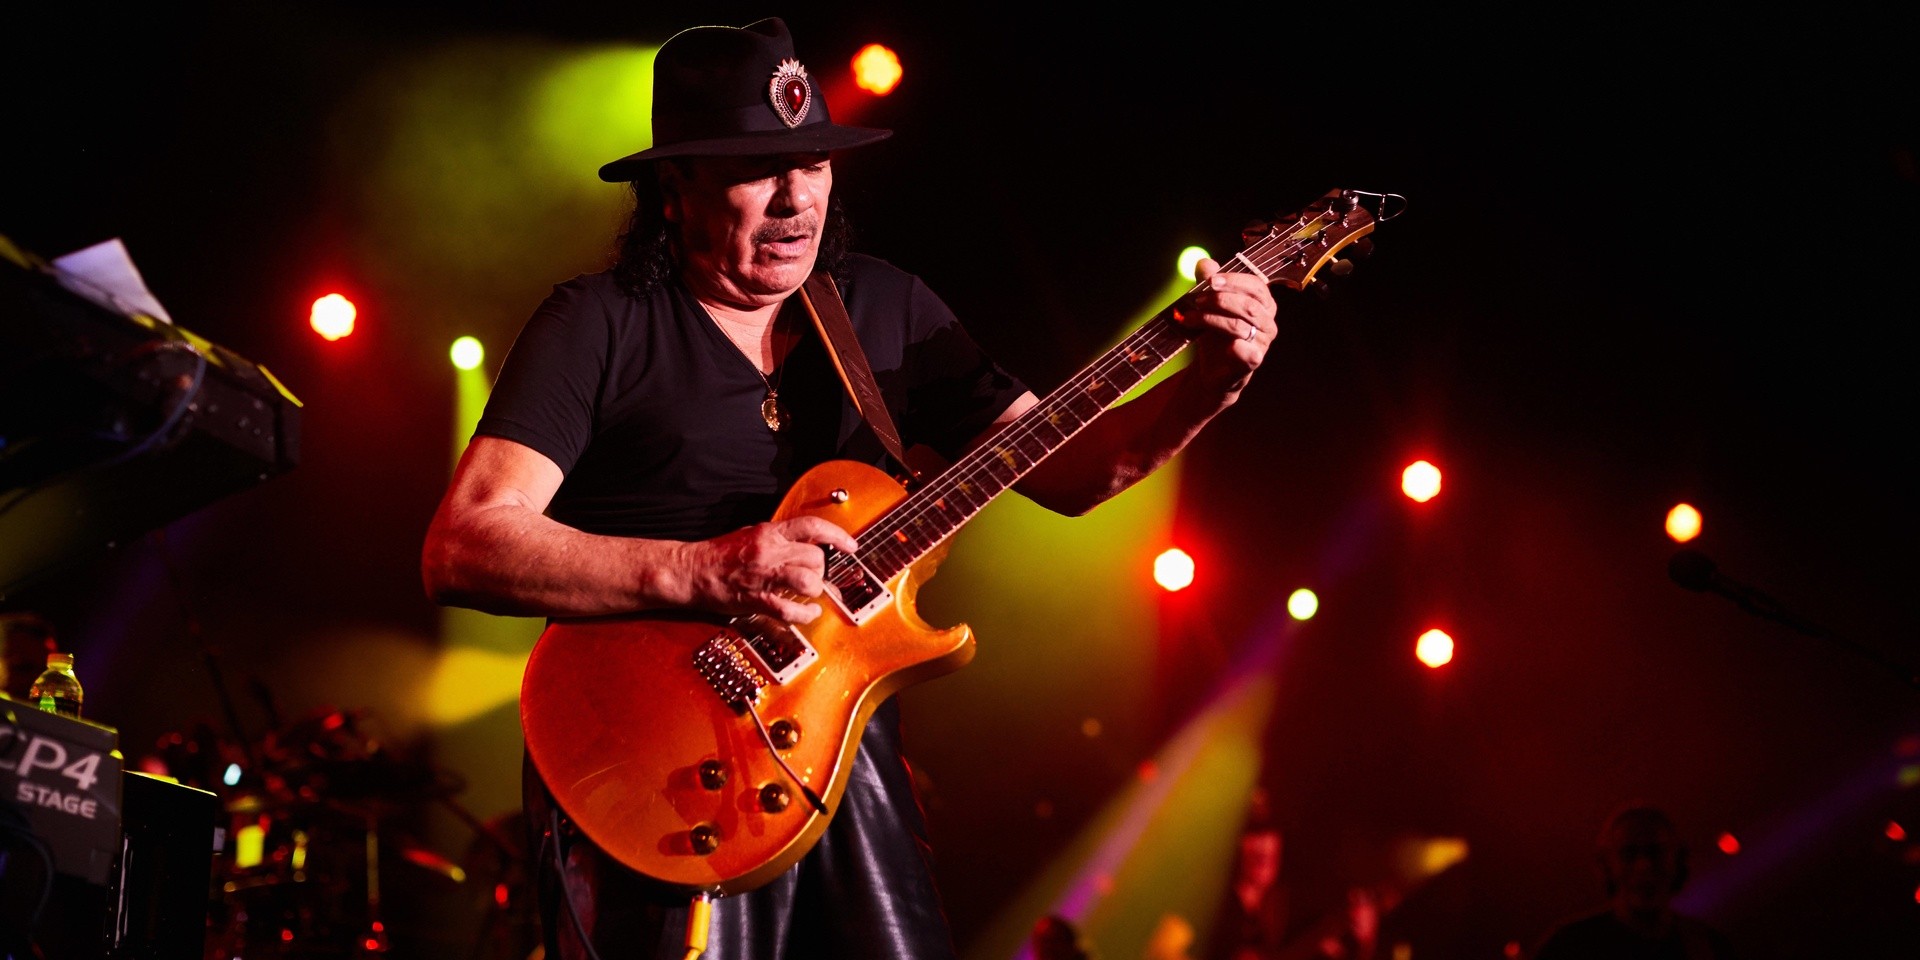 PHOTO GALLERY: Santana delivers a masterful performance in his Singapore return